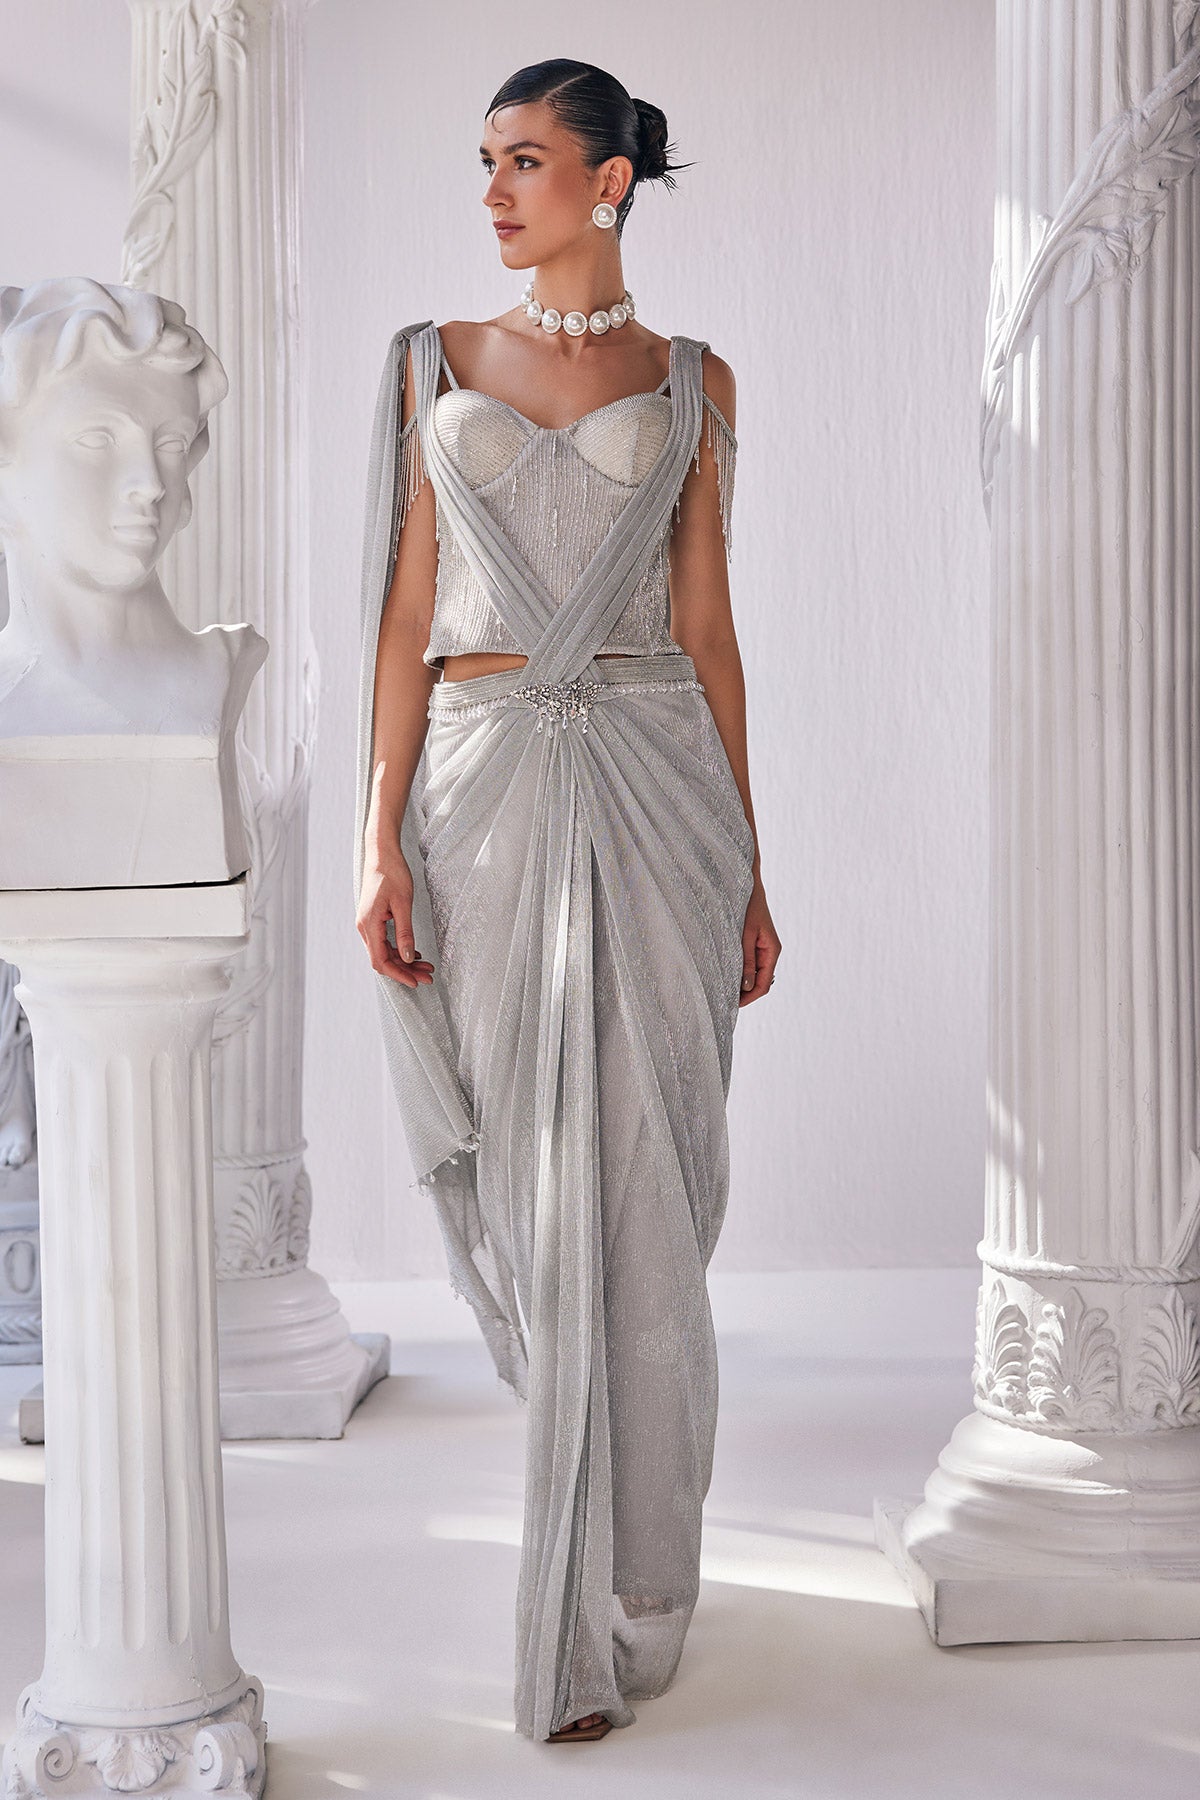 Silver Draped Saree Made With Crinkle Fabric Featuring A Corset Along With A Detailed Belt.